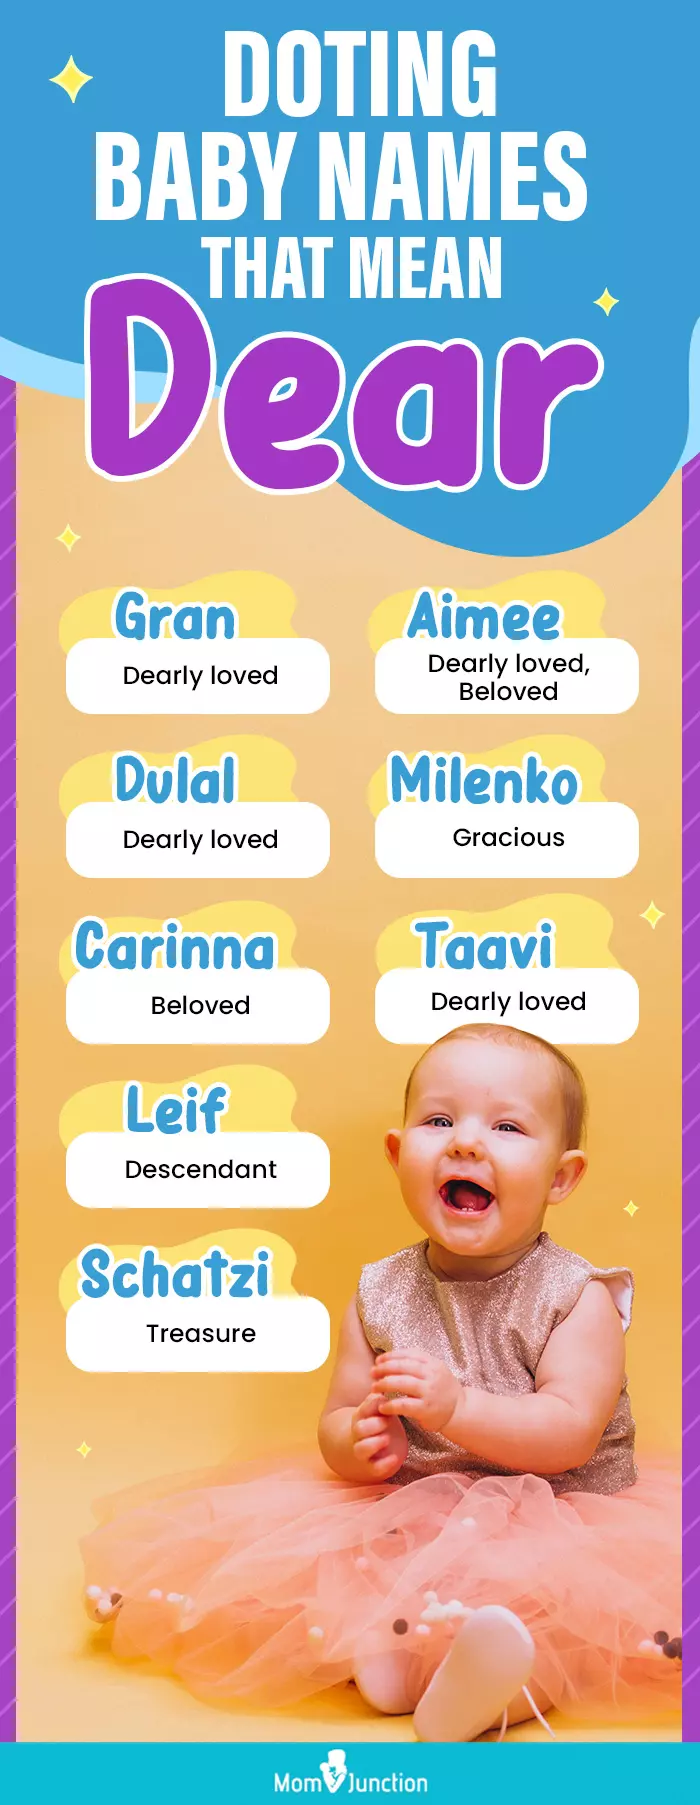 doting baby names that mean dear (infographic)